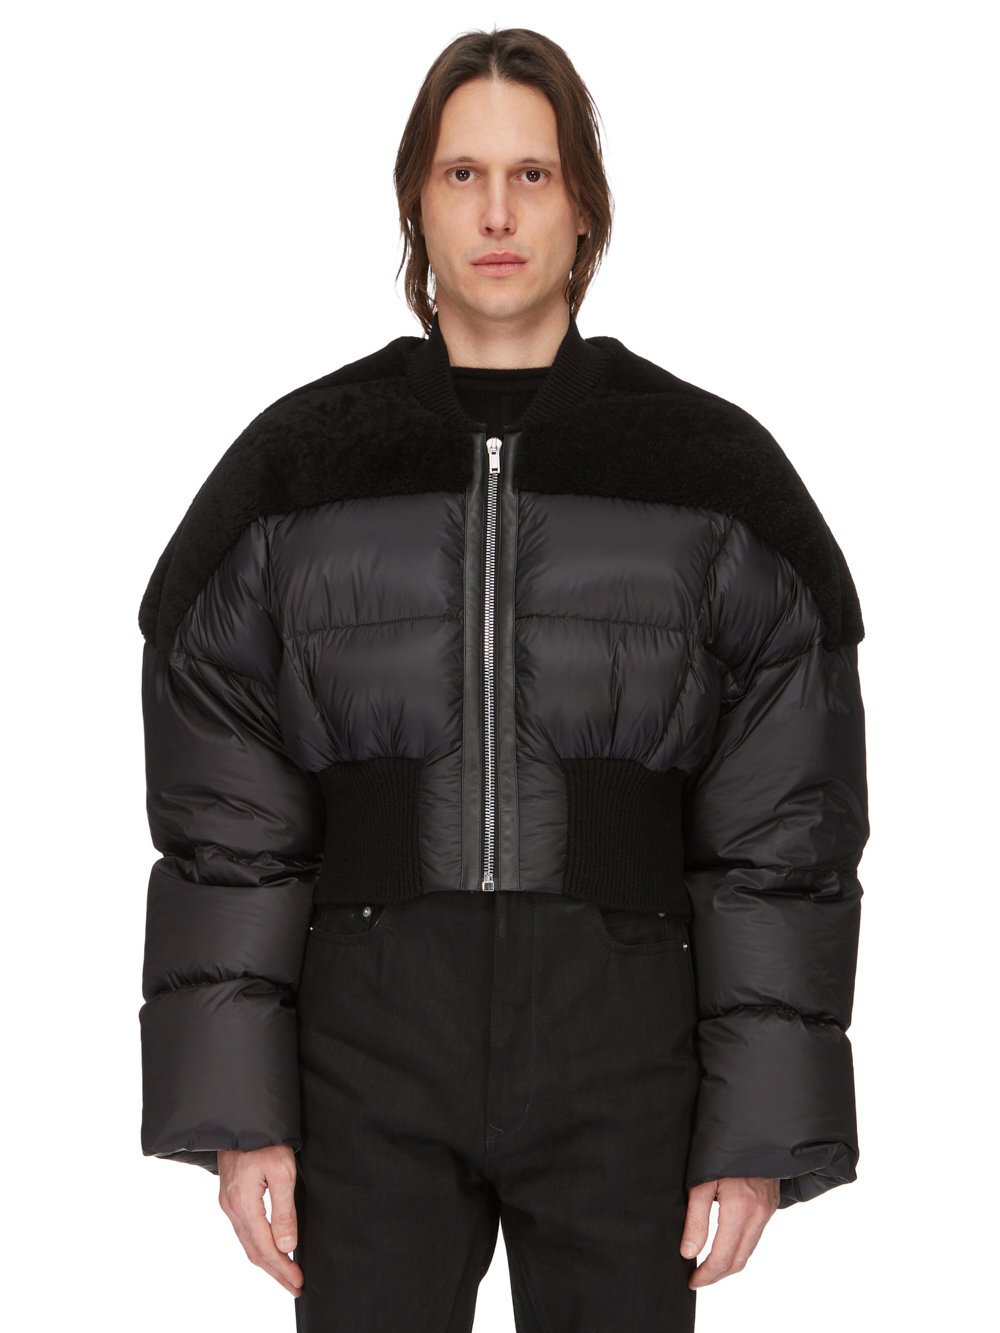 RICK OWENS FW23 LUXOR RUNWAY FLIGHT JKT CROPPED IN BLACK BUTTER LAMB SHEARLING AND RECYCLED NYLON